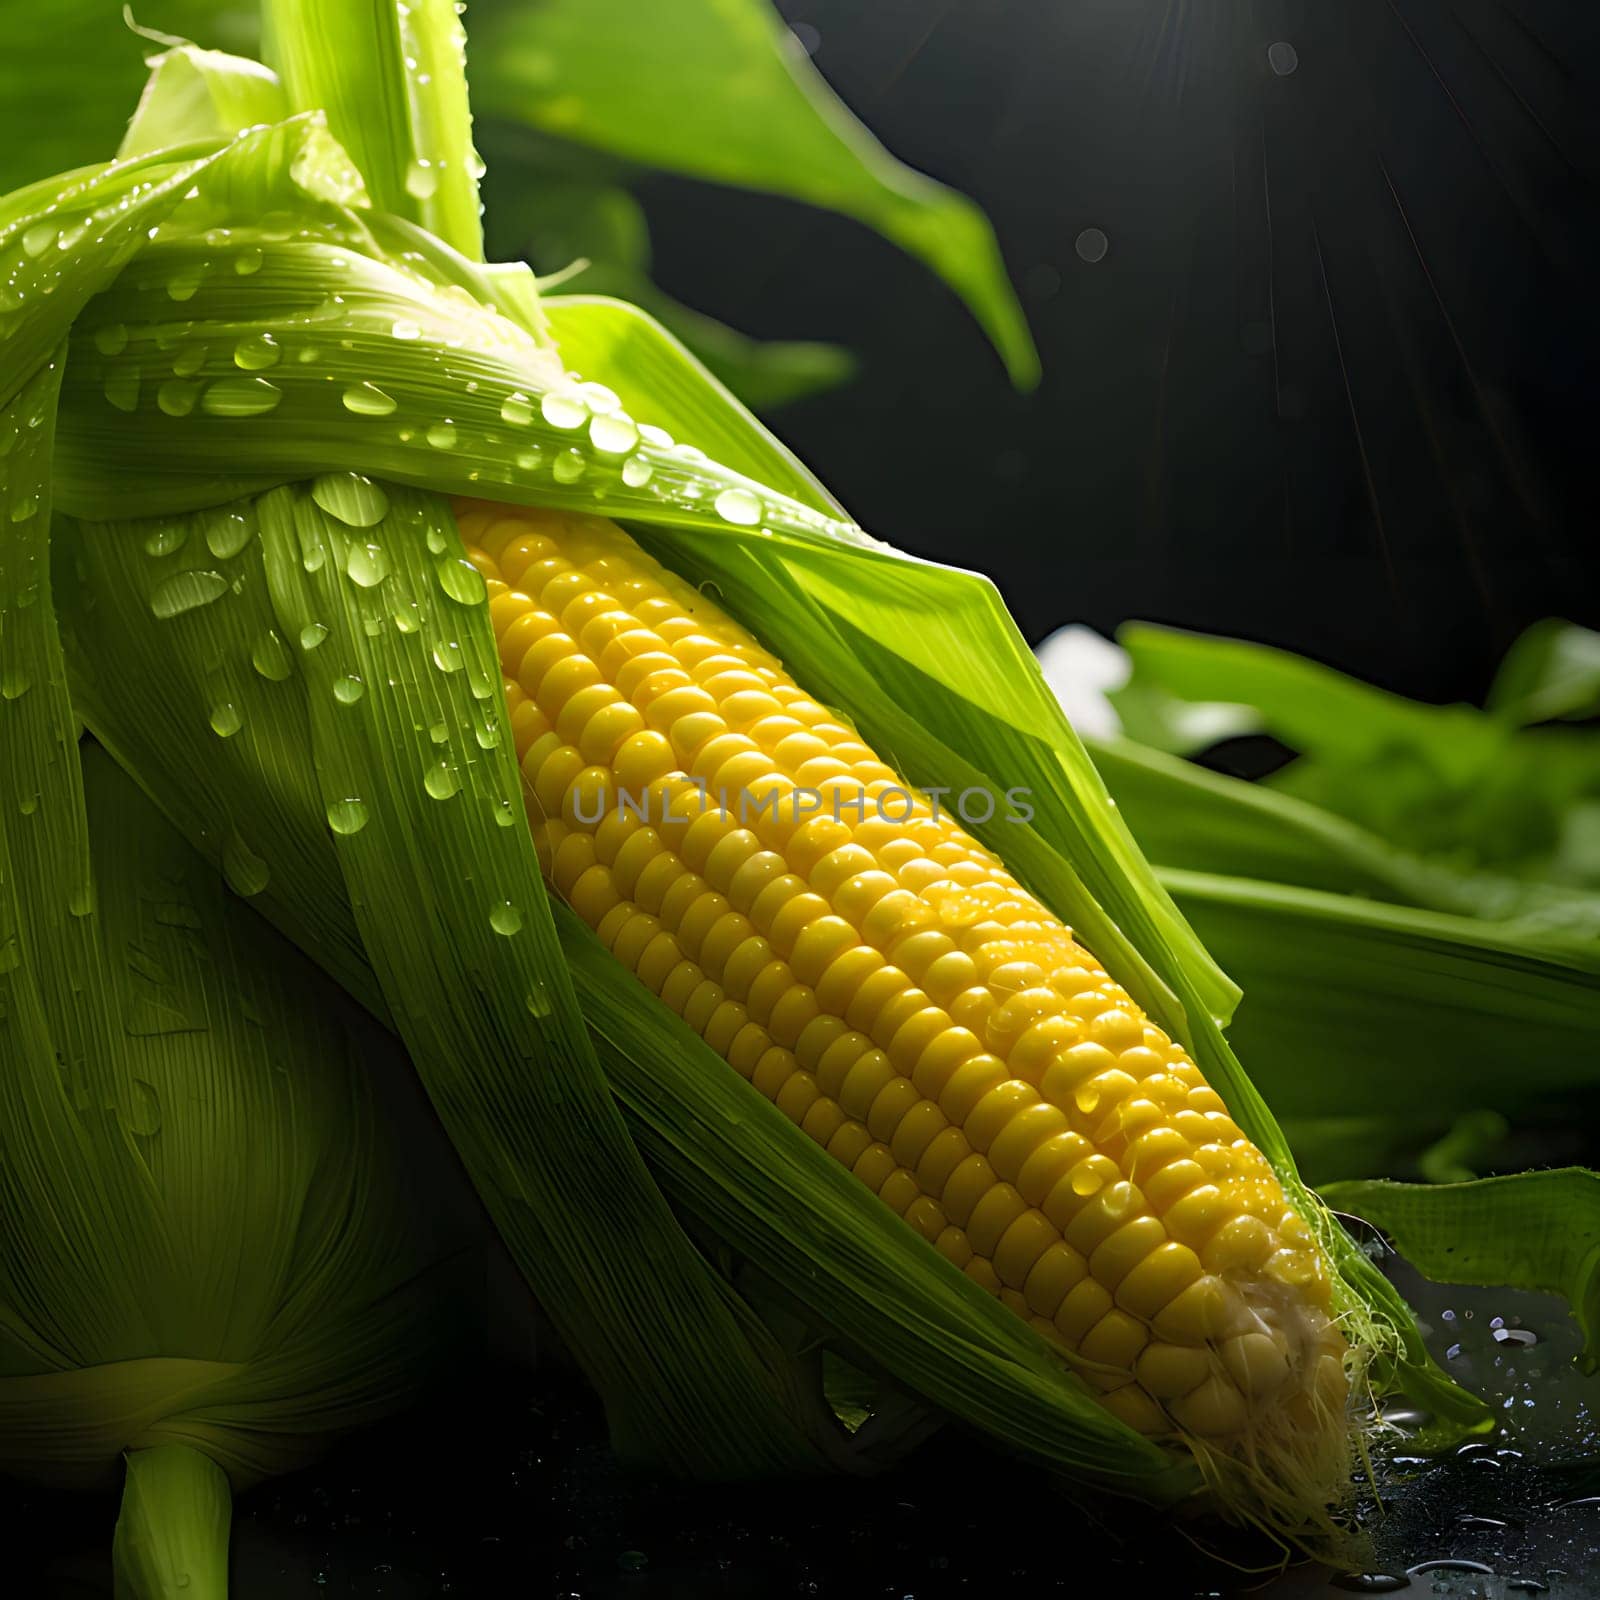 Yellow corn cob in Green Leaf, raindrops of water. Corn as a dish of thanksgiving for the harvest. by ThemesS